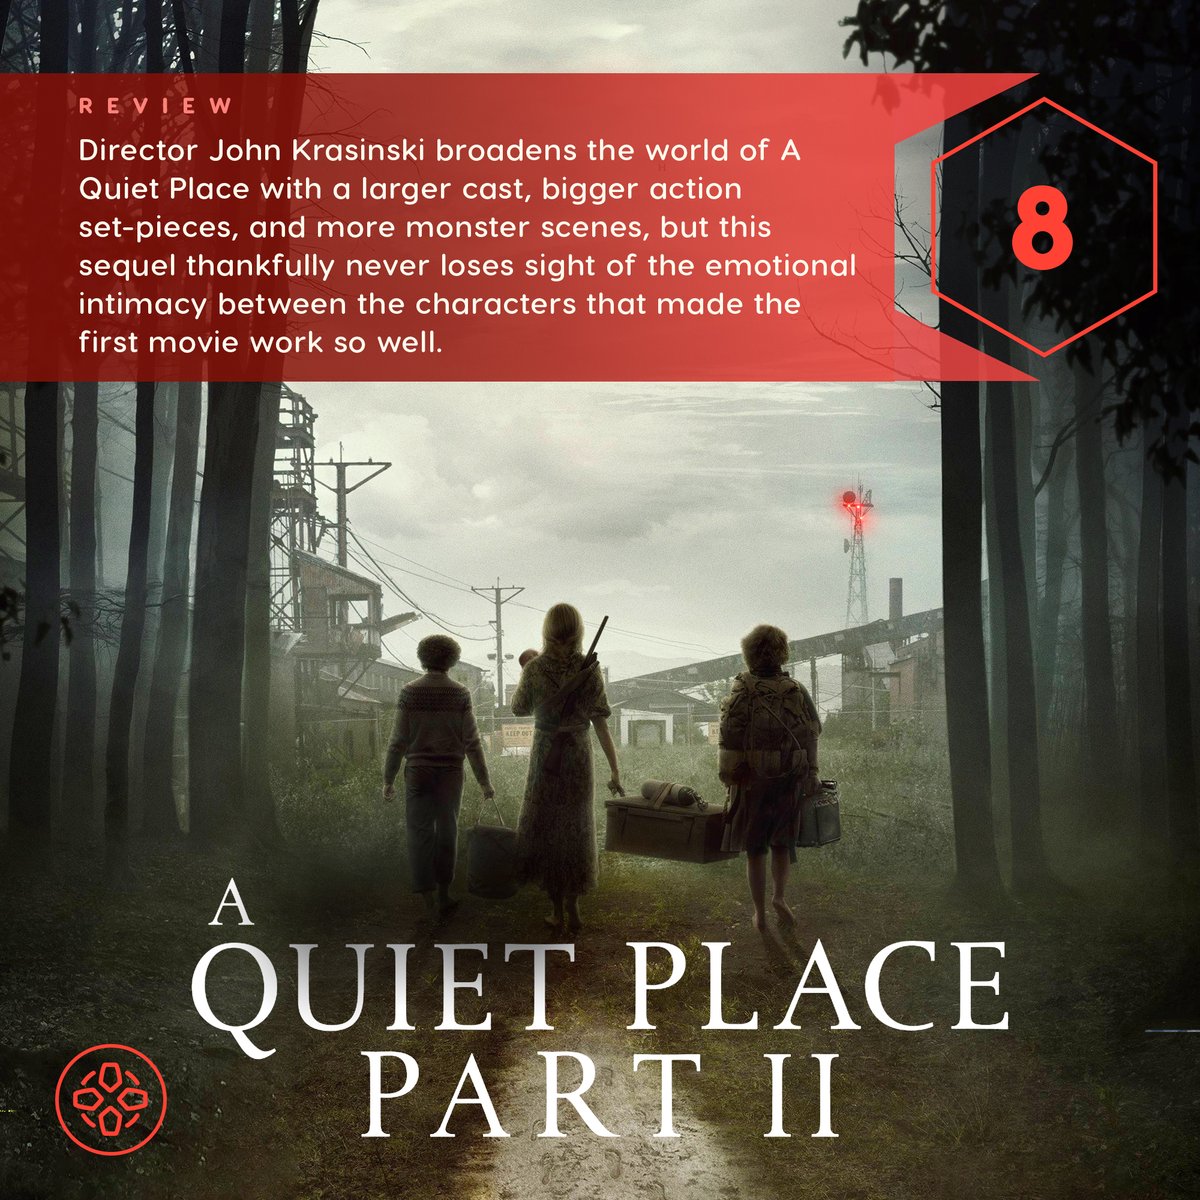 Ign While A Quiet Place Part 2 Can T Quite Top Its Predecessor And Doesn T Nail The Multi Narrative Cross Cutting It Employs It S Still A Highly Exciting And Well Acted Follow Up Our Review